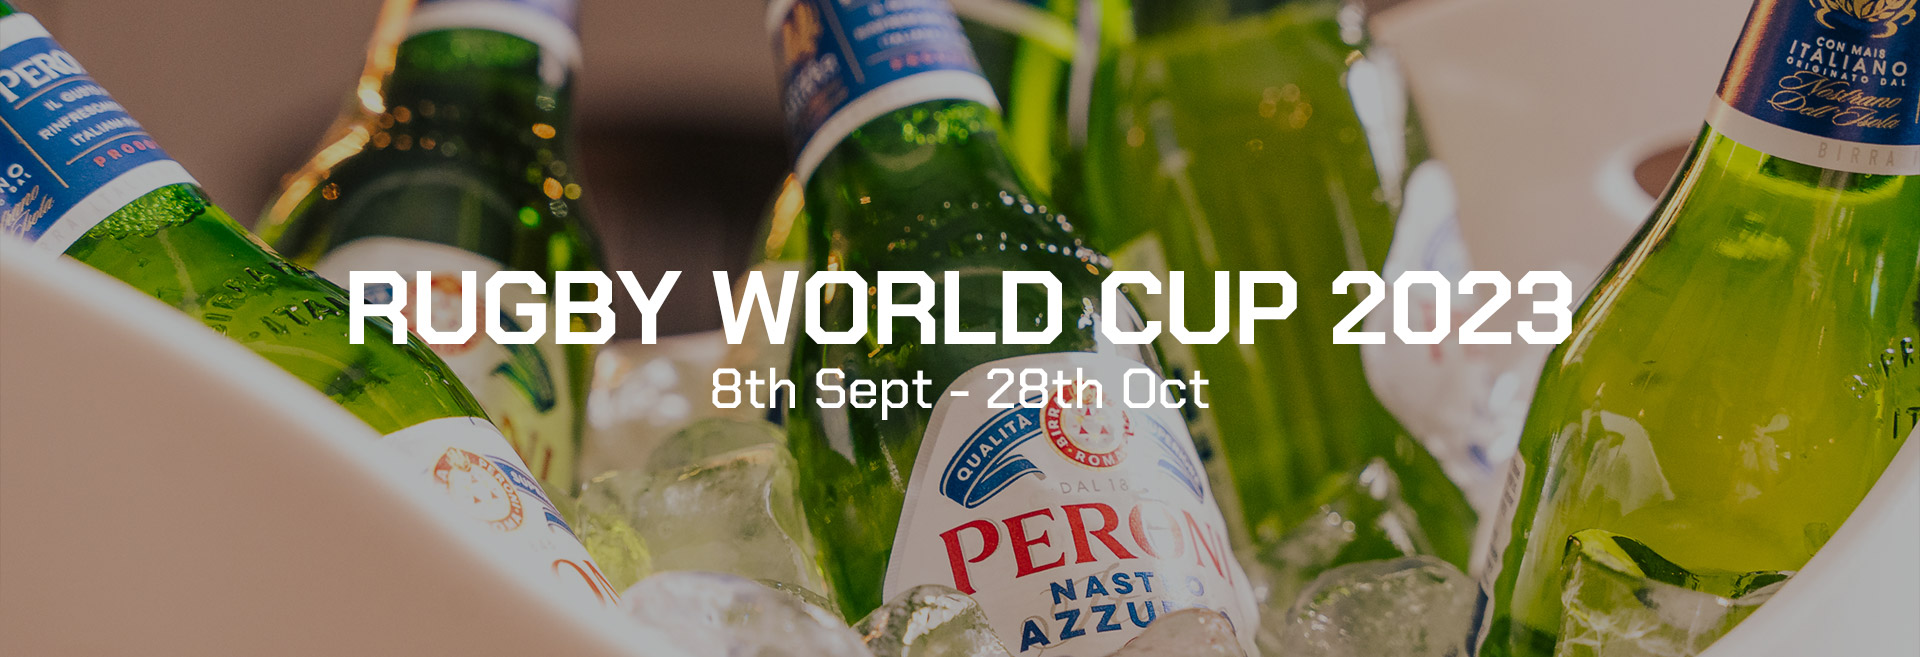 Watch the Rugby World Cup at The Jericho